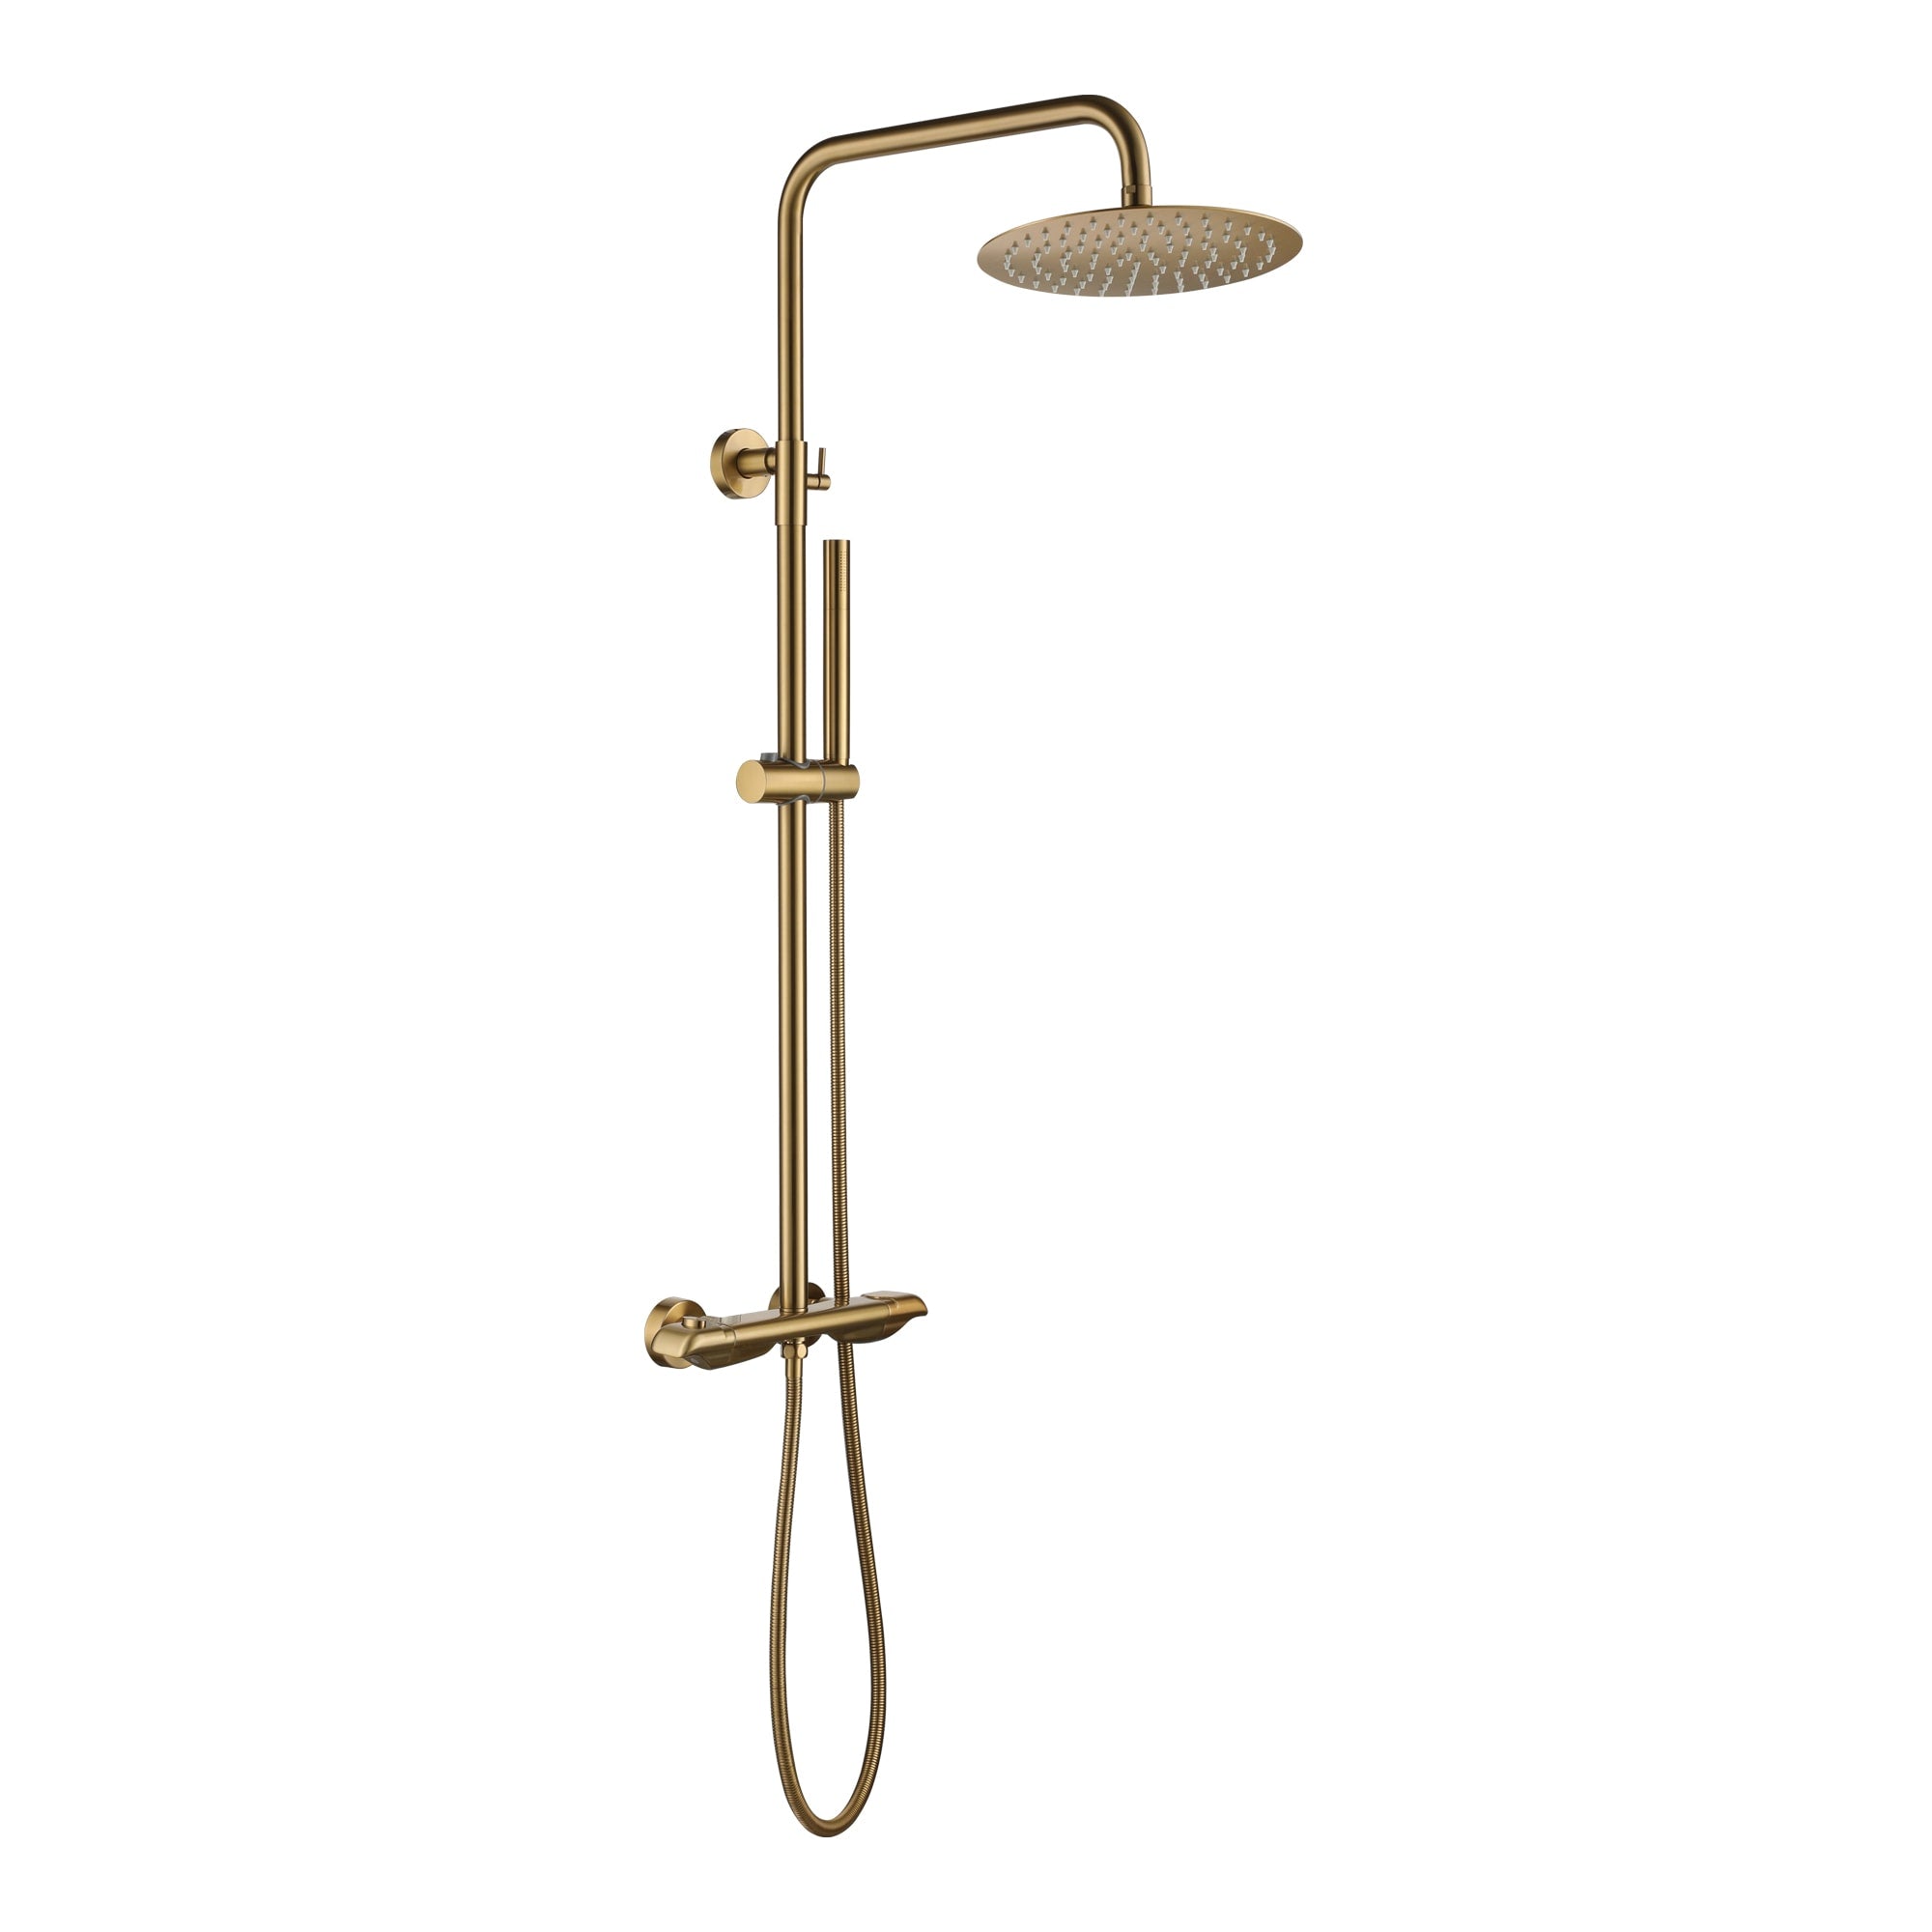 5GPM Shower System with 47-Inch Adjustable Slide Bar, Round Rainfall Shower Head and Handheld Shower (Brushed Gold)